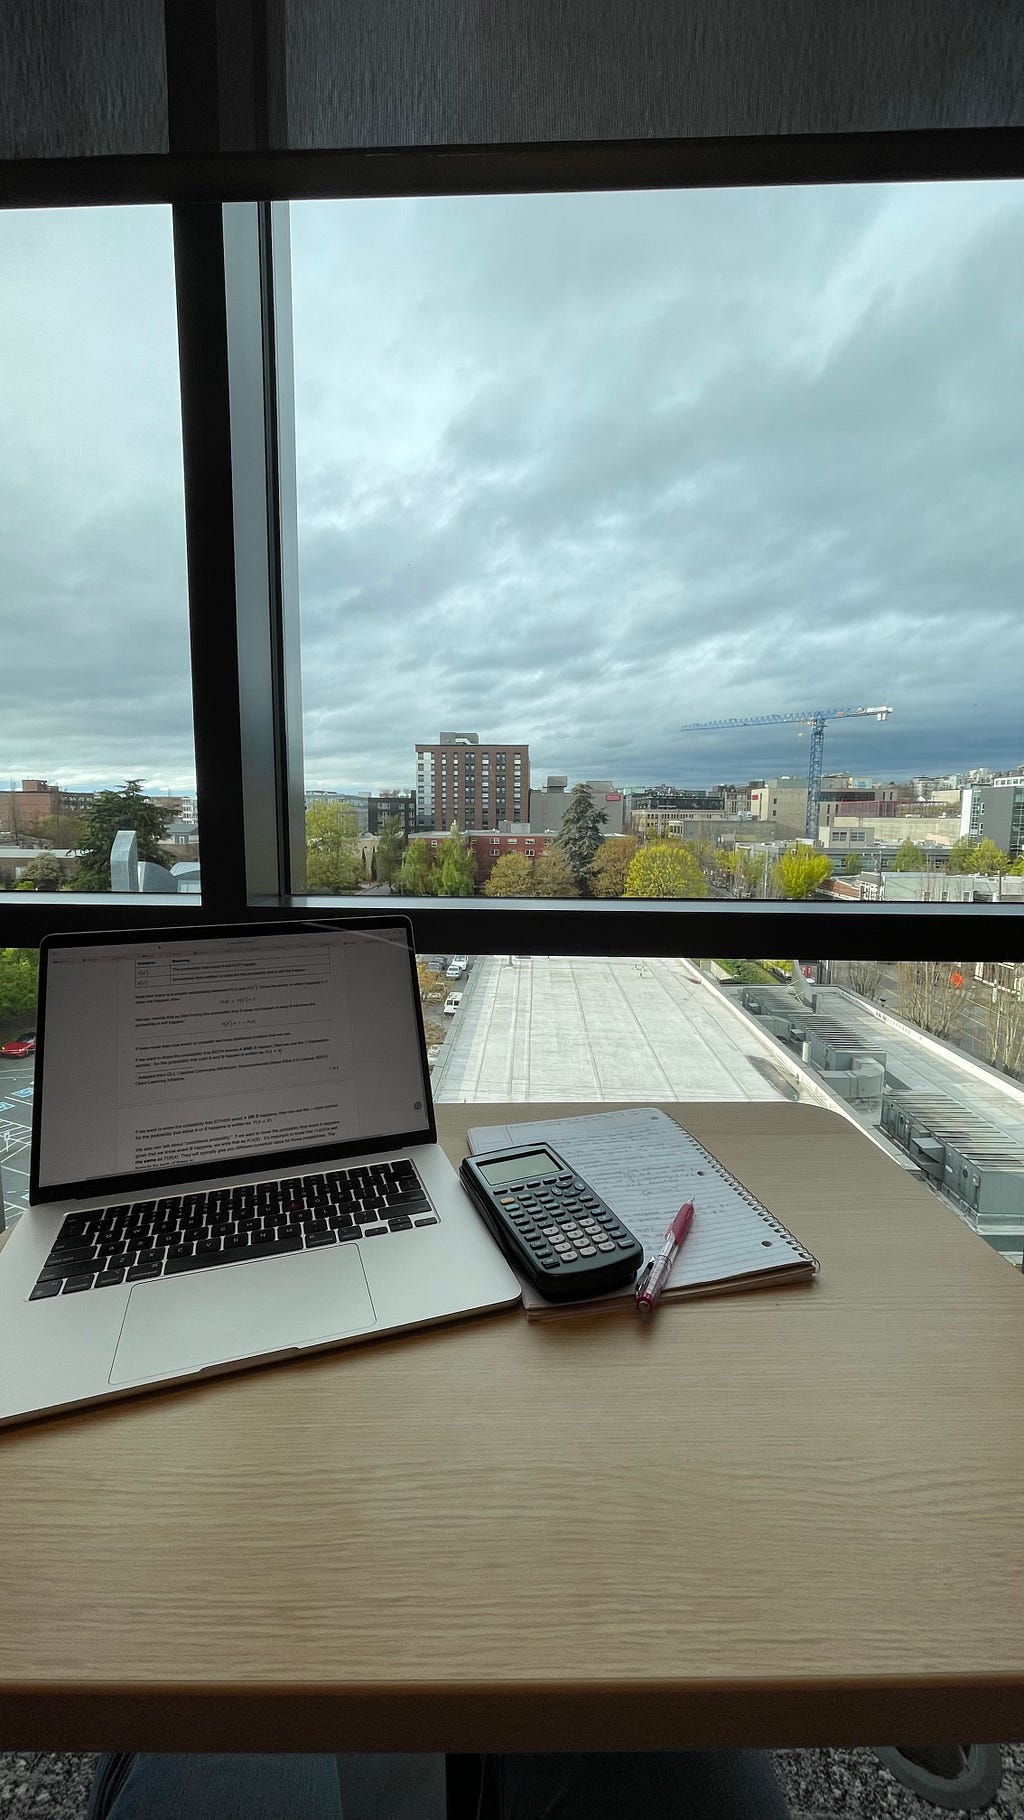 A laptop, notebook, and calculator on a wooden desk with large windows overlooking the city and Seattle University campus